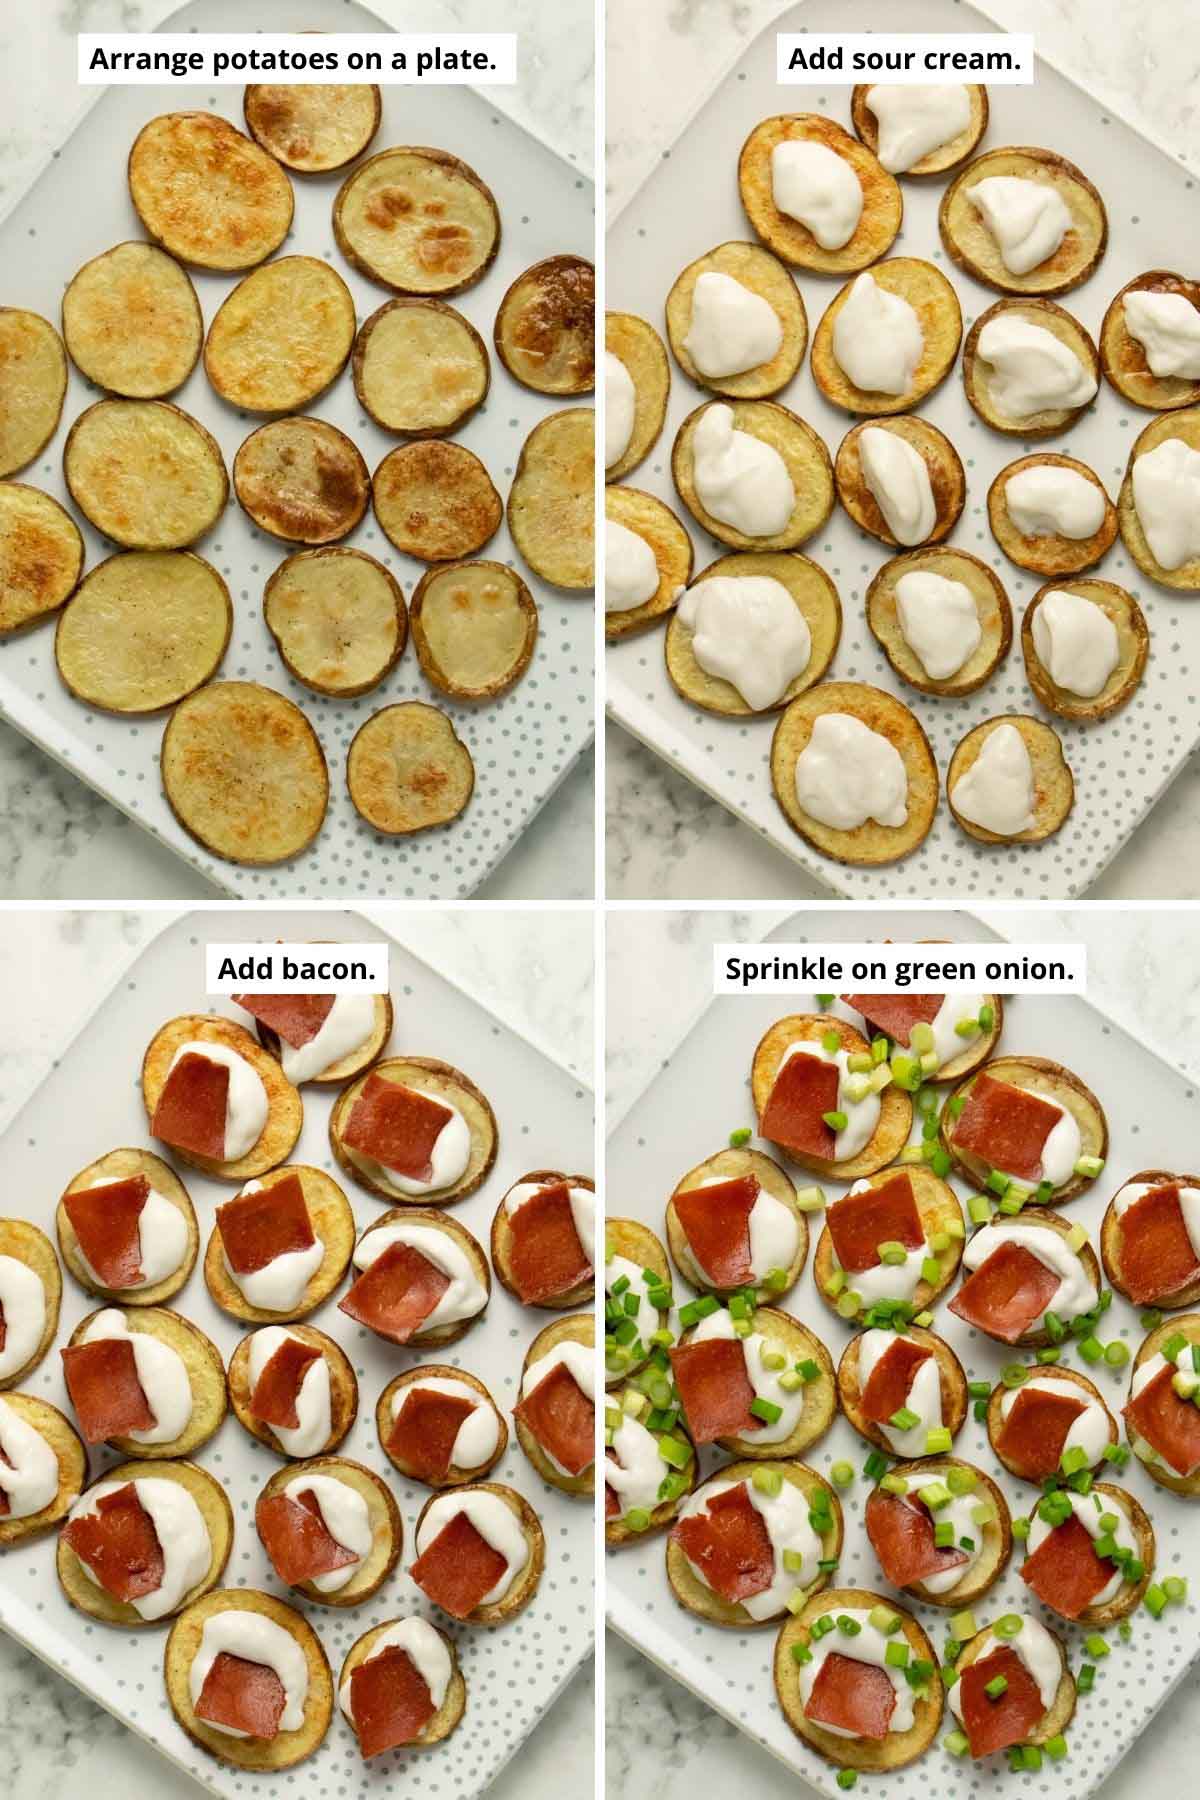 image collage showing the air fryer potato slices and adding each topping